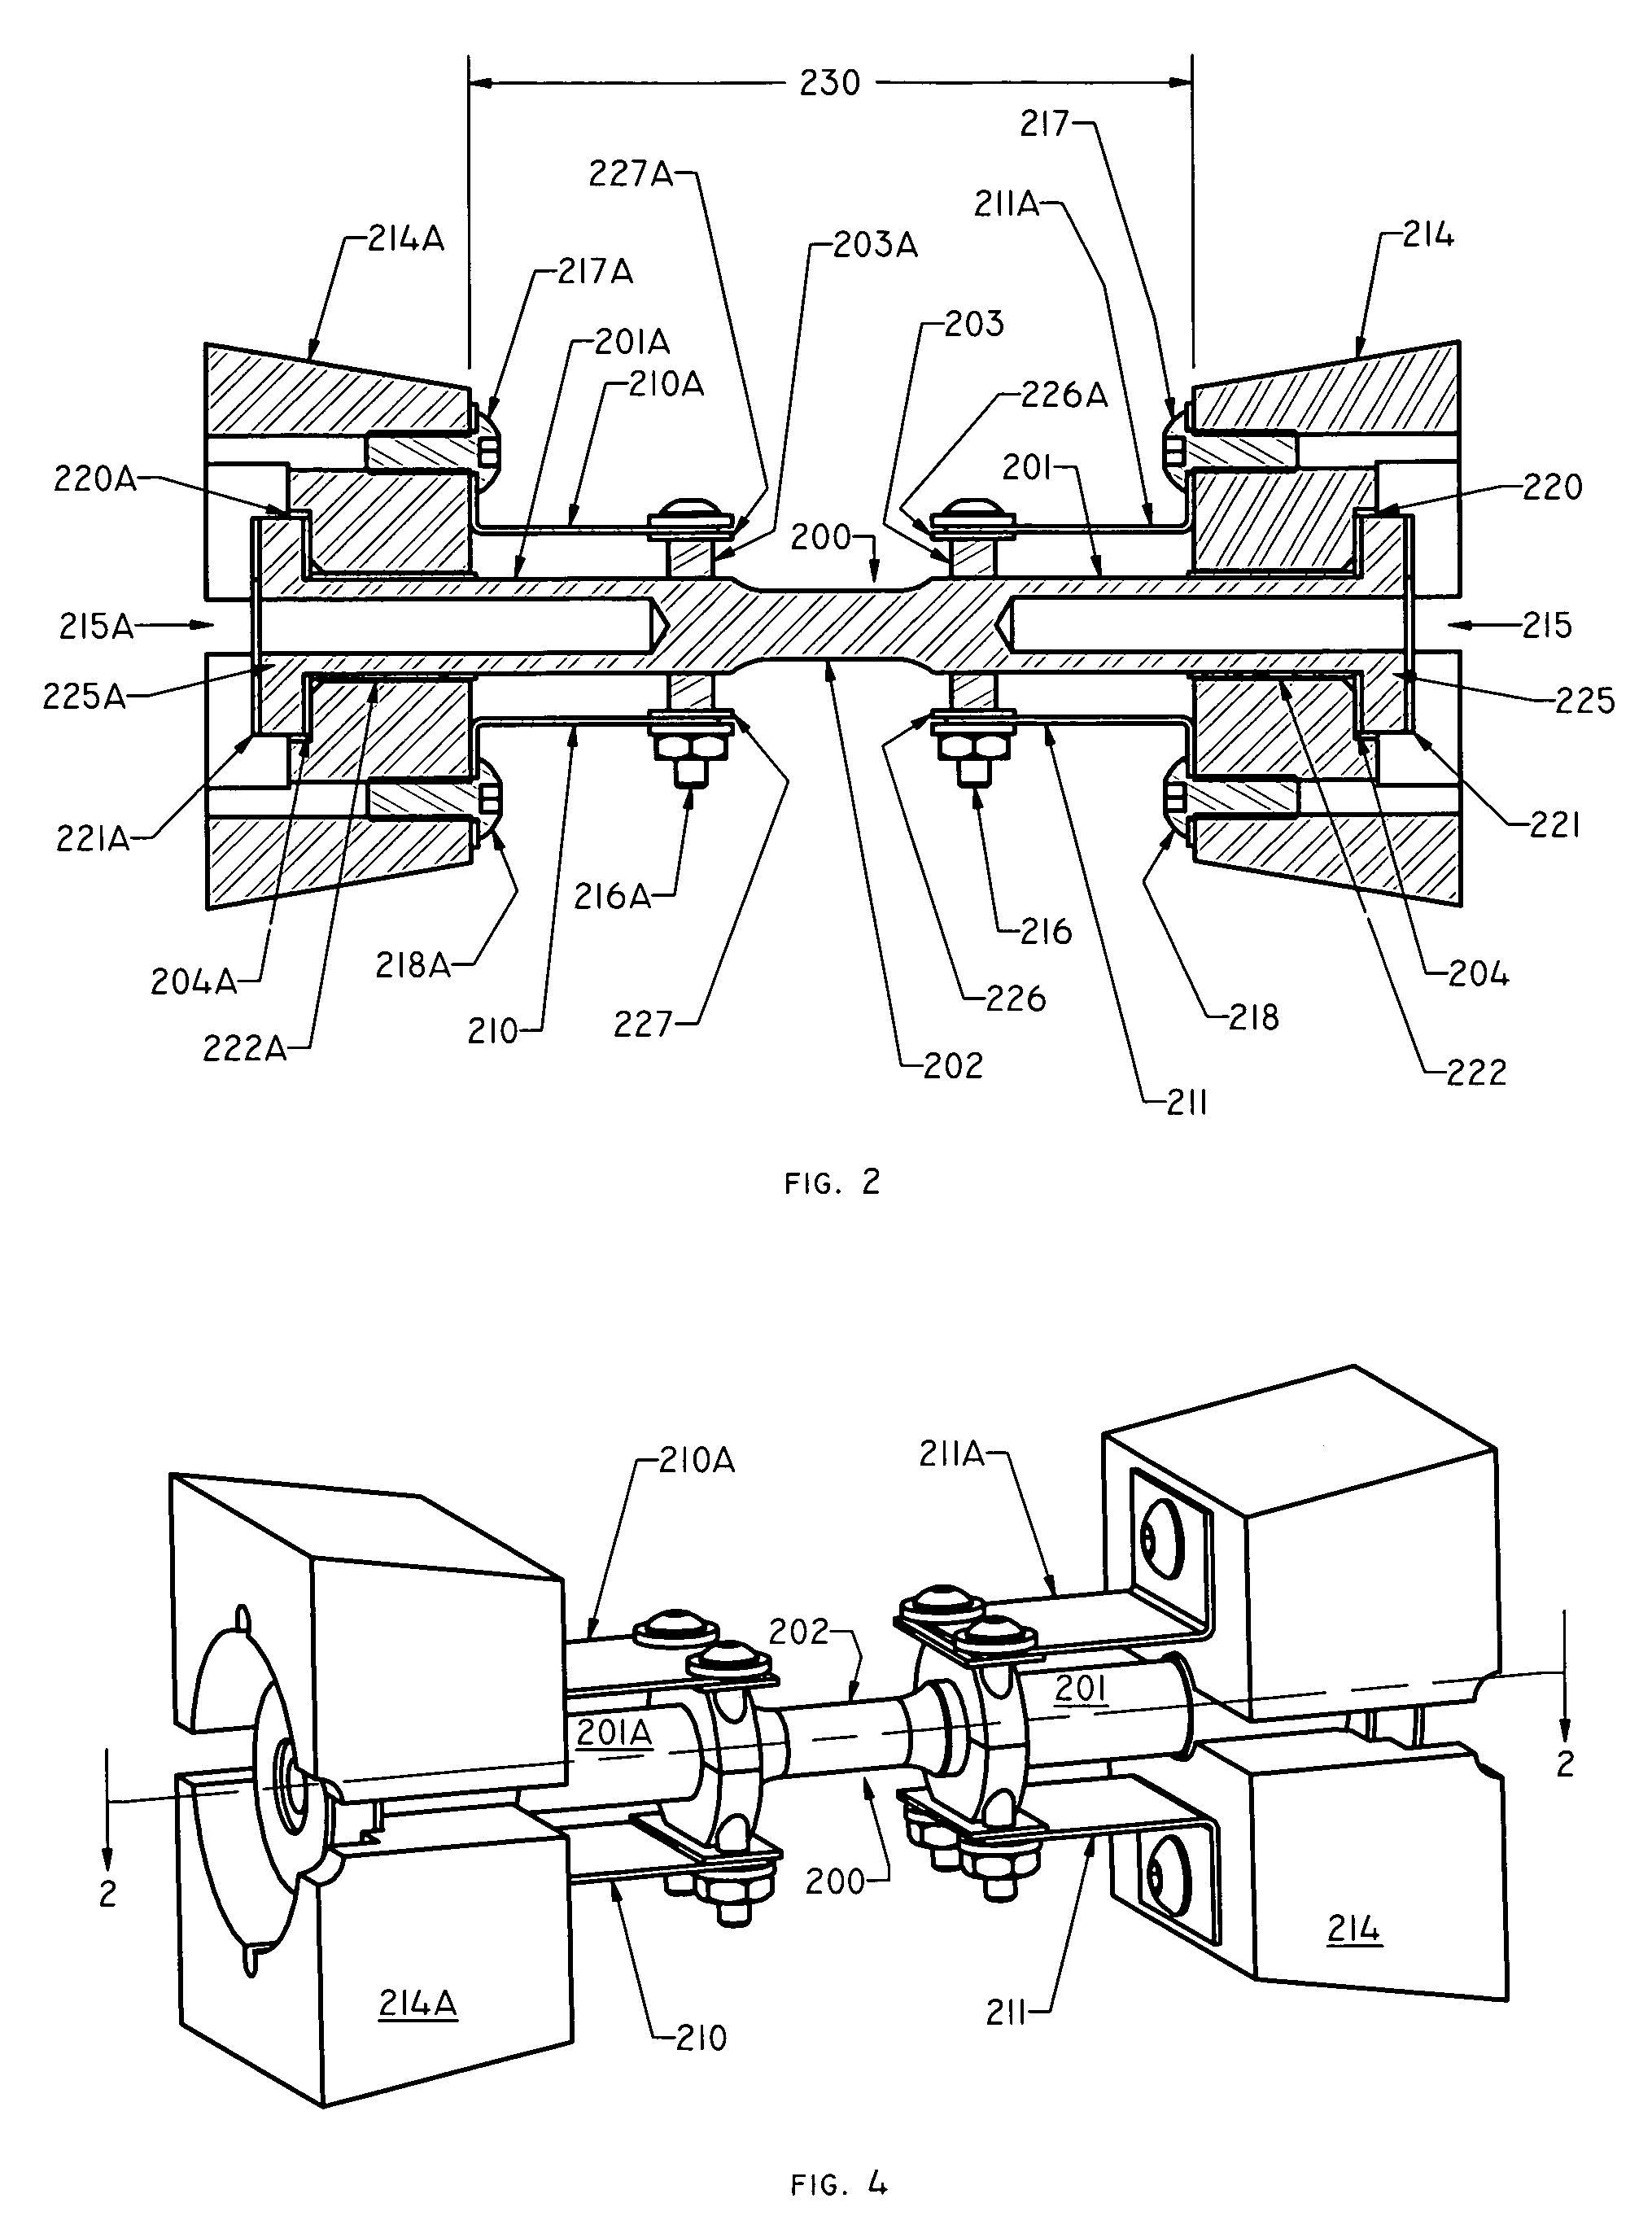 Technique for applying direct resistance heating current to a specific location in a specimen under test while substantially reducing thermal gradients in the specimen gauge length